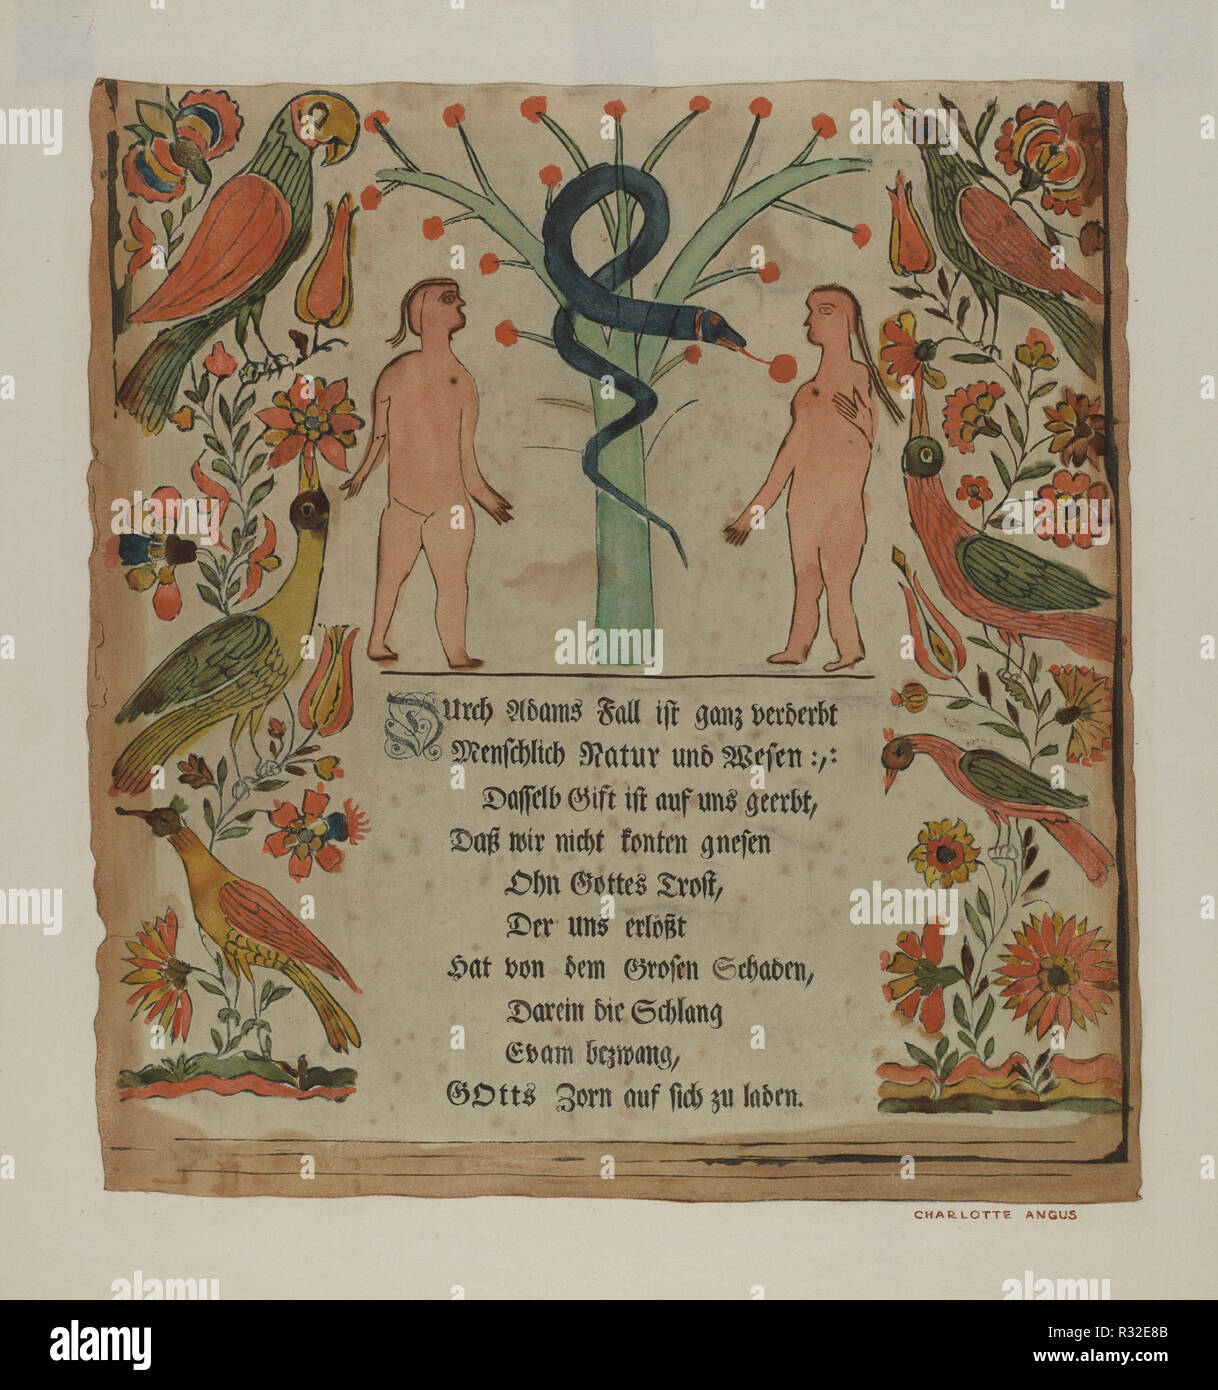 Woodcut Vorschrift. Dated: 1935/1942. Dimensions: overall: 45.2 x 40.7 cm (17 13/16 x 16 in.). Medium: watercolor and graphite on paper. Museum: National Gallery of Art, Washington DC. Author: Charlotte Angus. Stock Photo